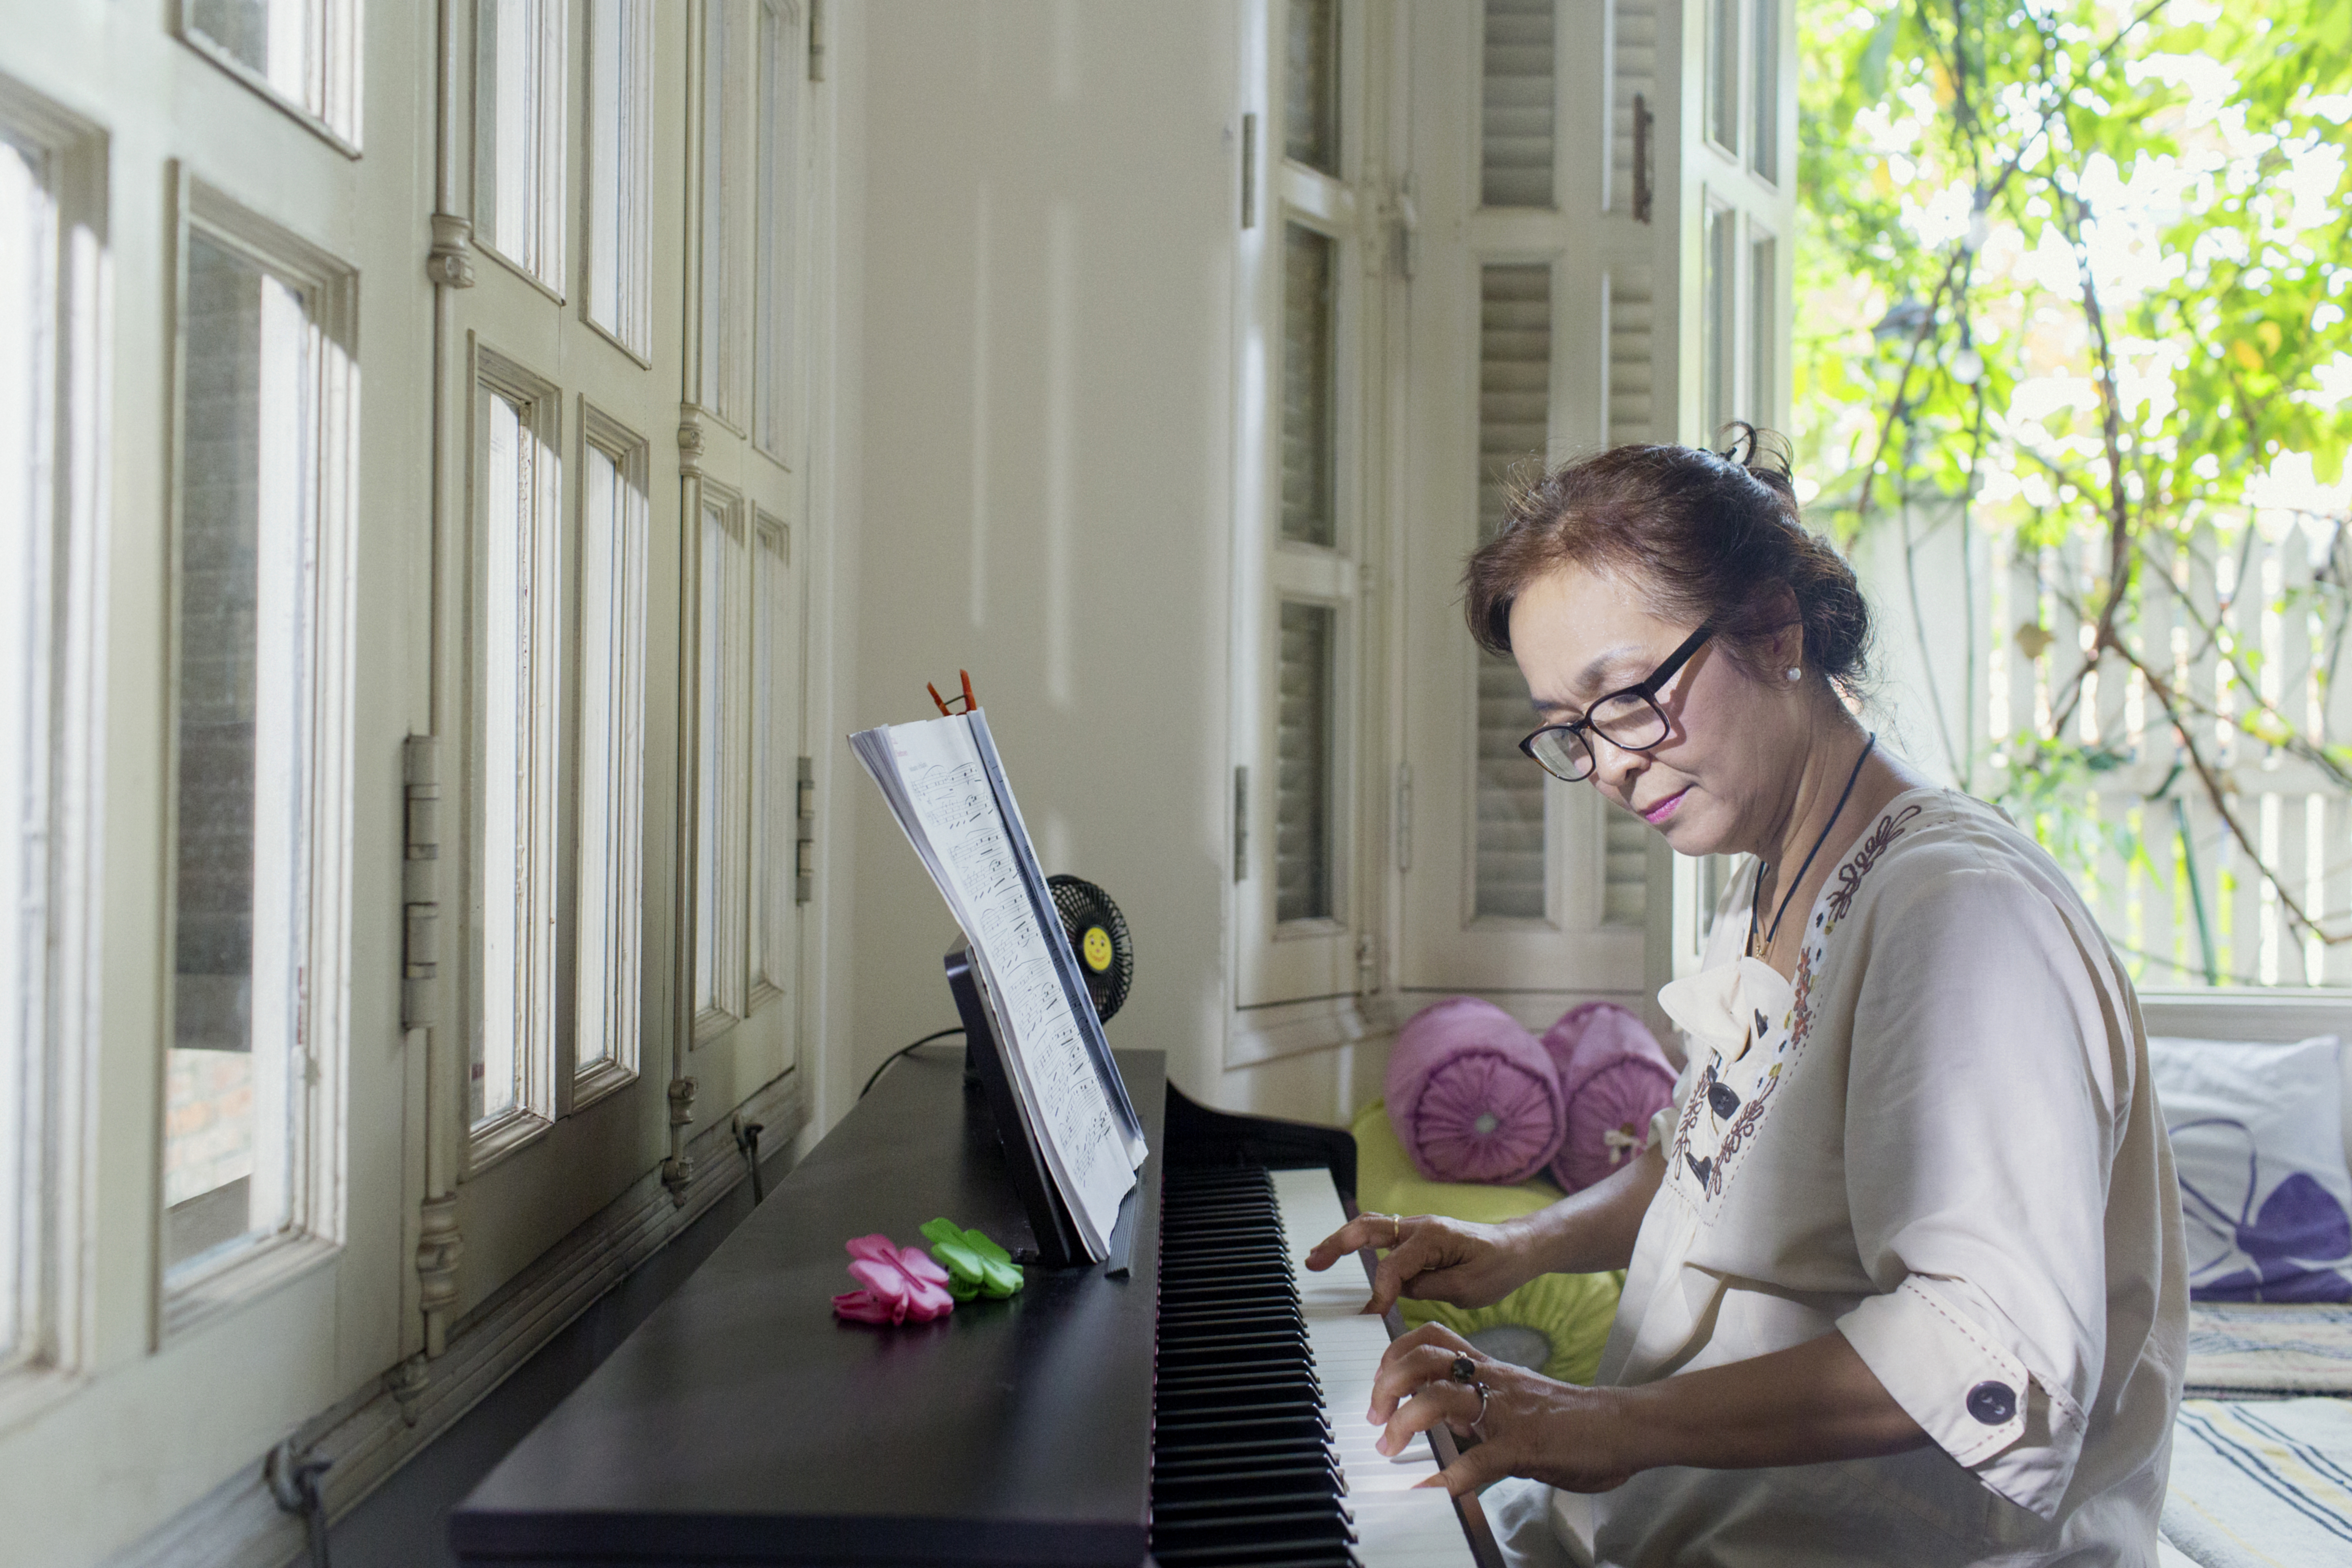 Hua Thanh Giang, 58 years old – playing the piano